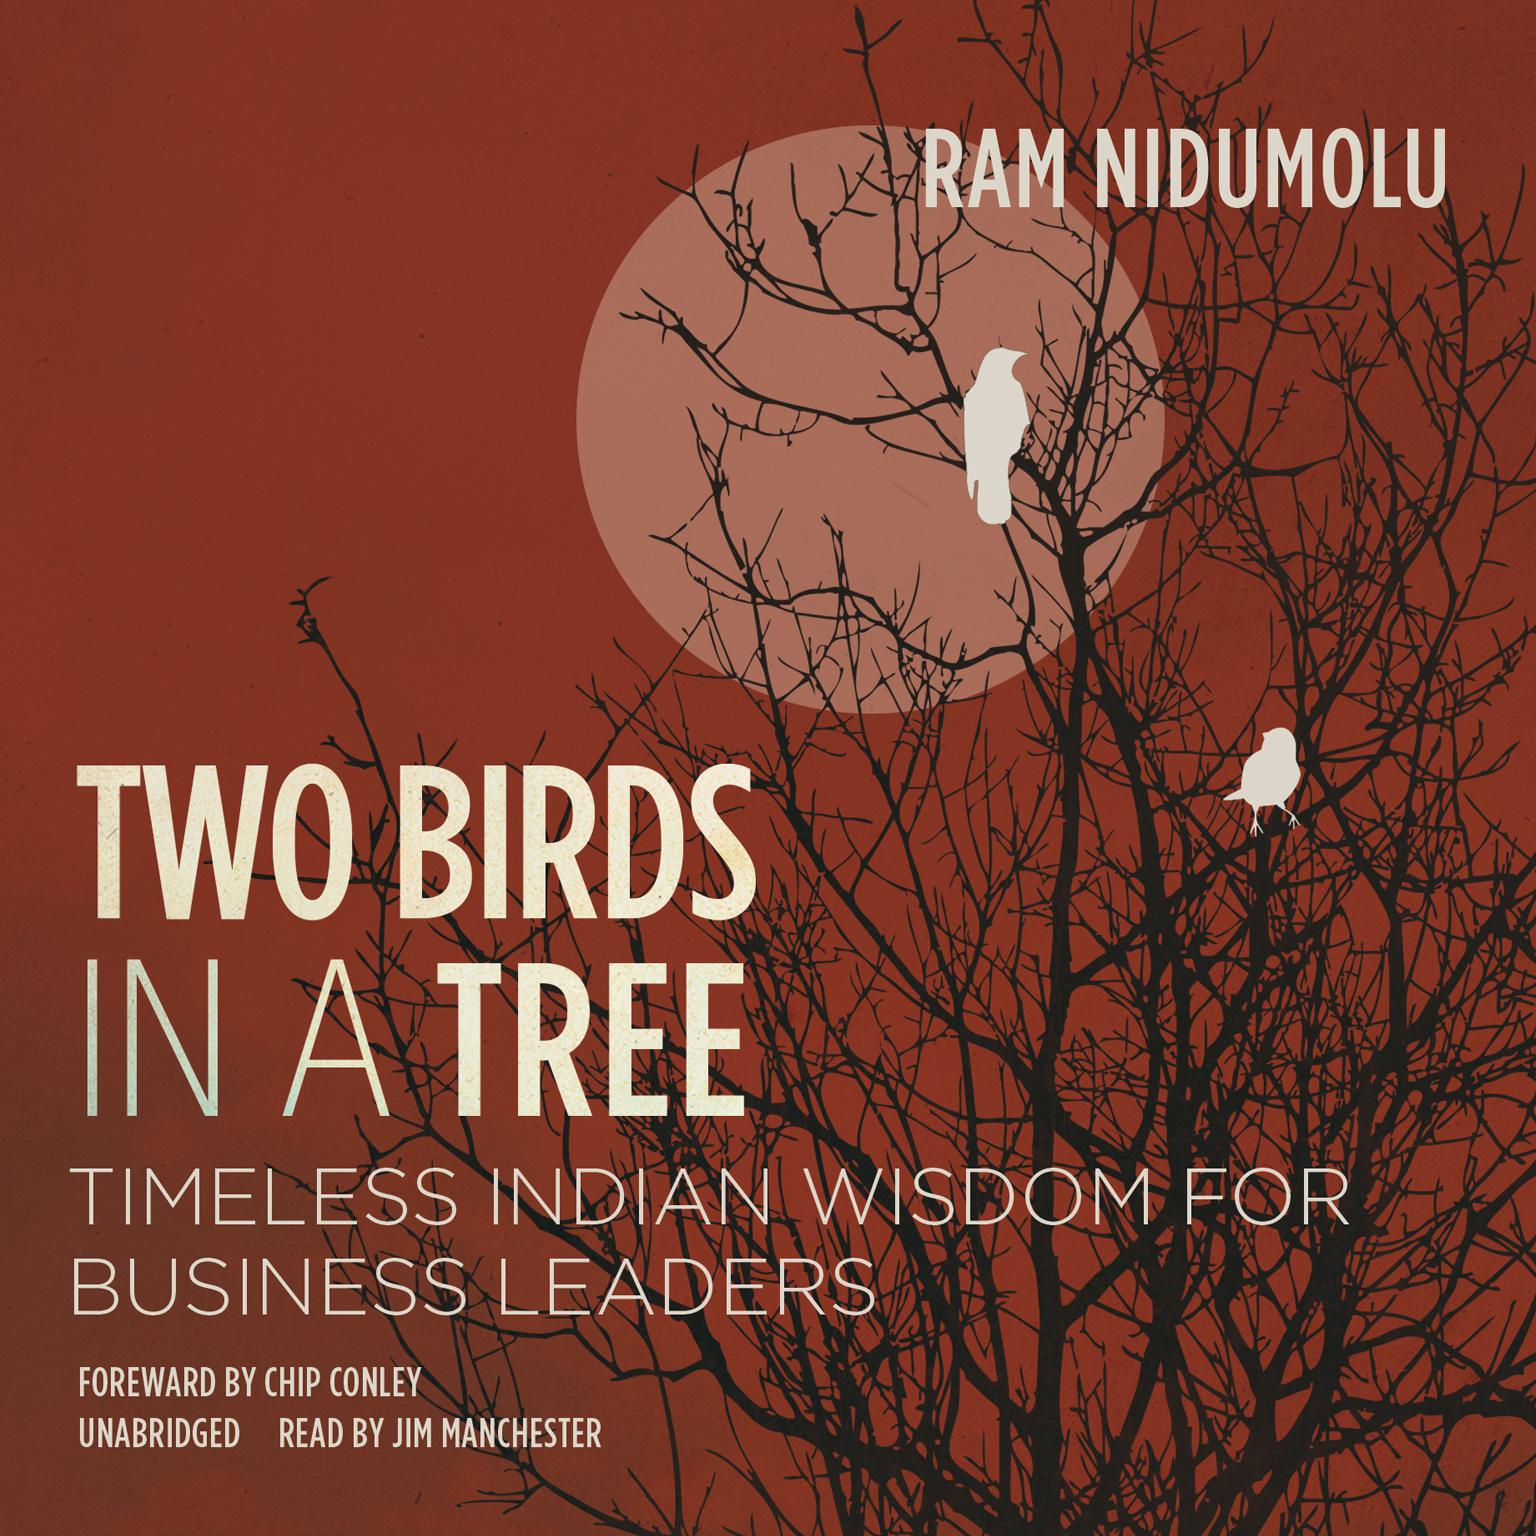 Two Birds in a Tree: Timeless Indian Wisdom for Business Leaders Audiobook, by Ram Nidumolu